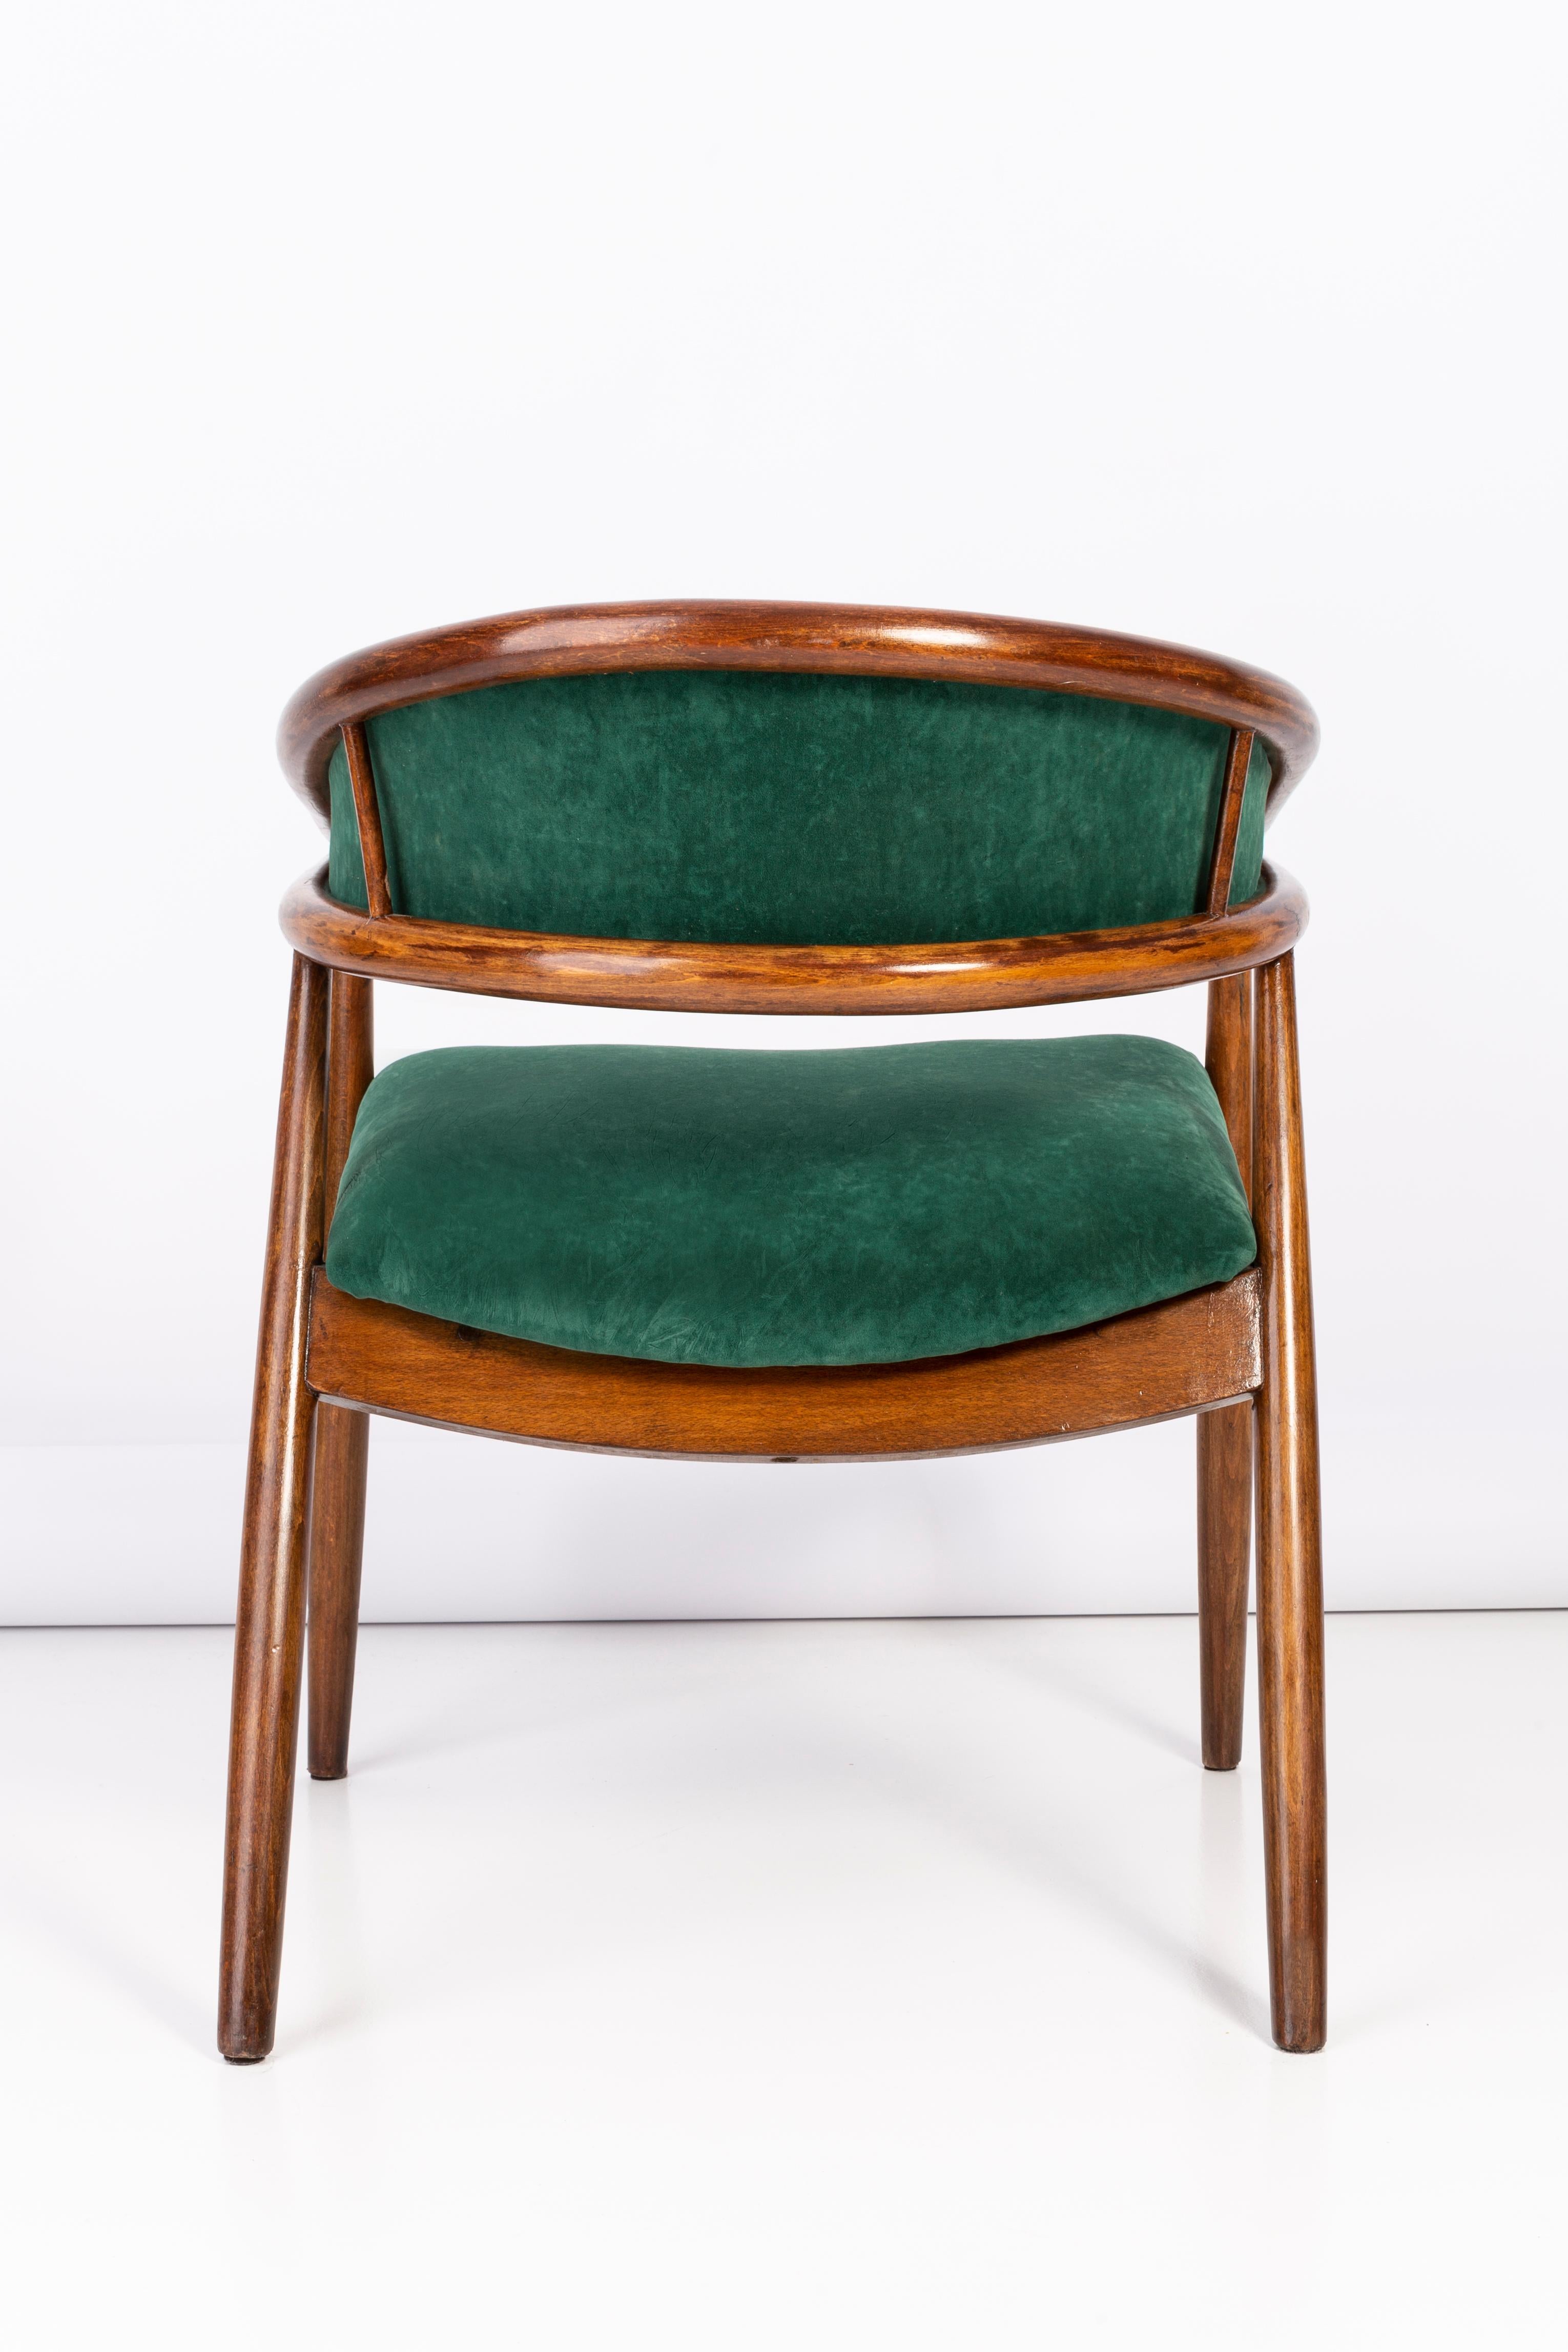 Set of Four Vintage James Mont Bent Beech Armchairs, Dark Green, Europe, 1960s For Sale 5